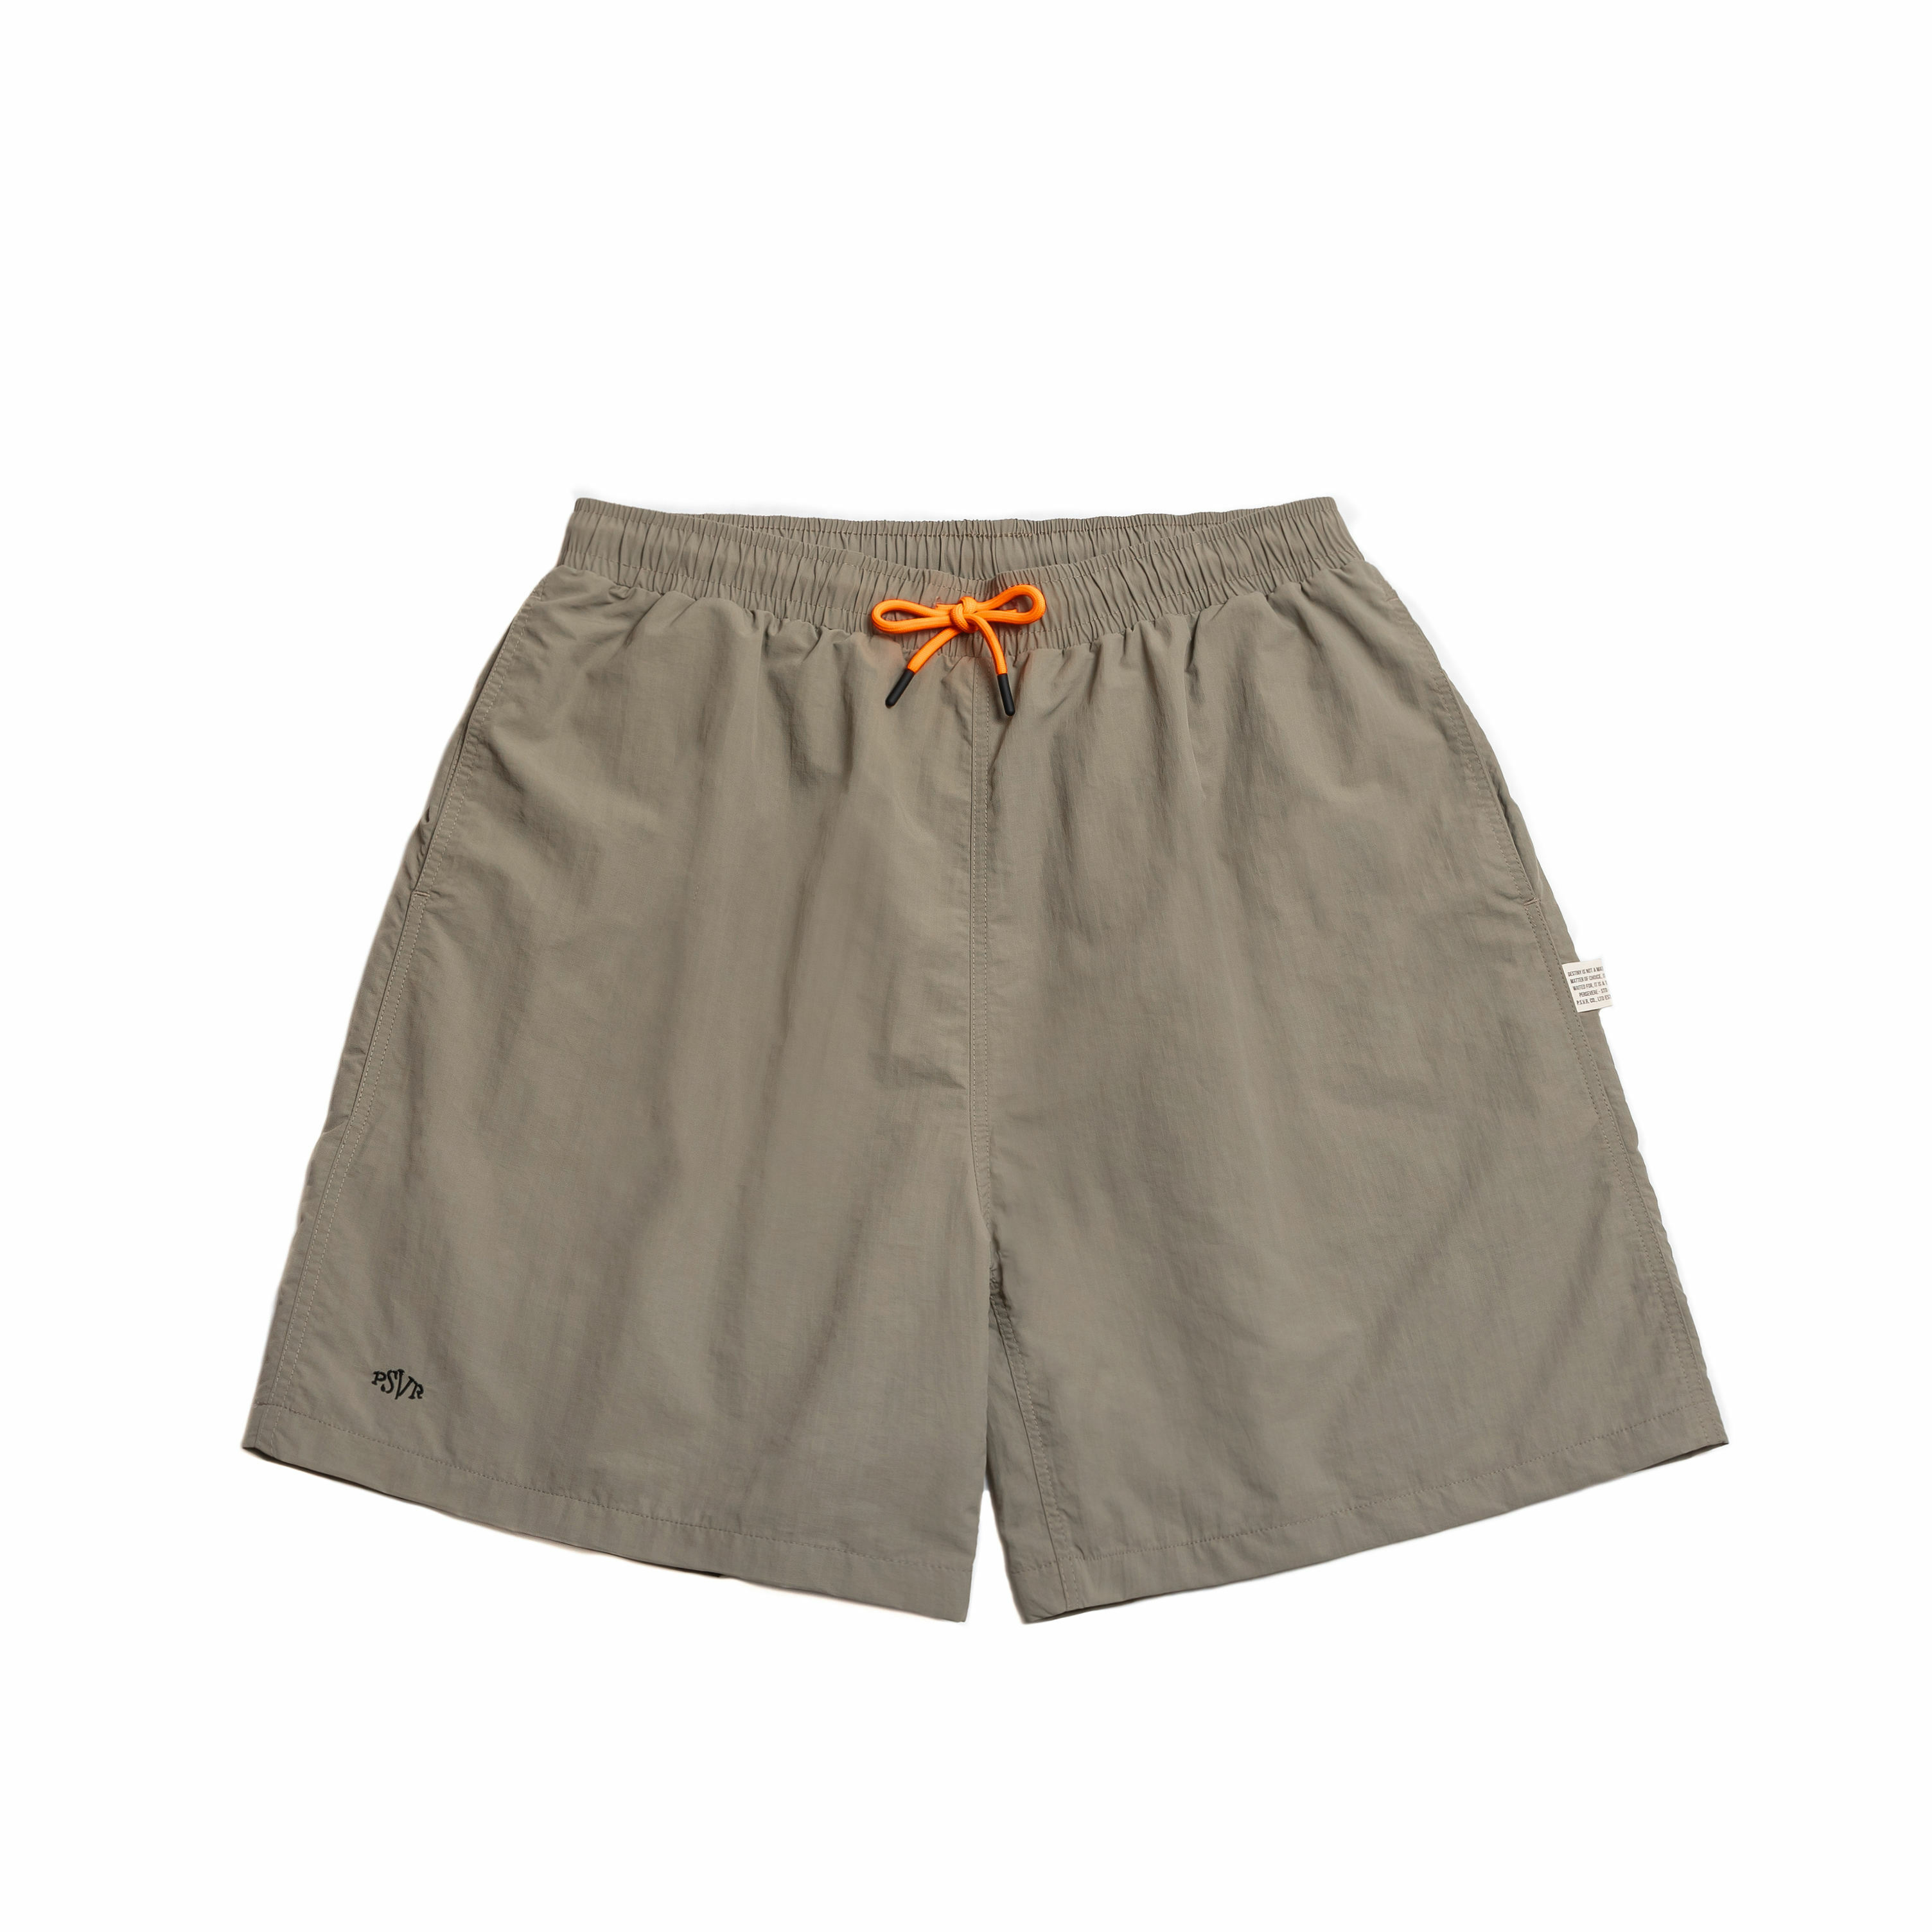 PERSEVERE WATER-REPELLENT SHORTS - SAND COLOR